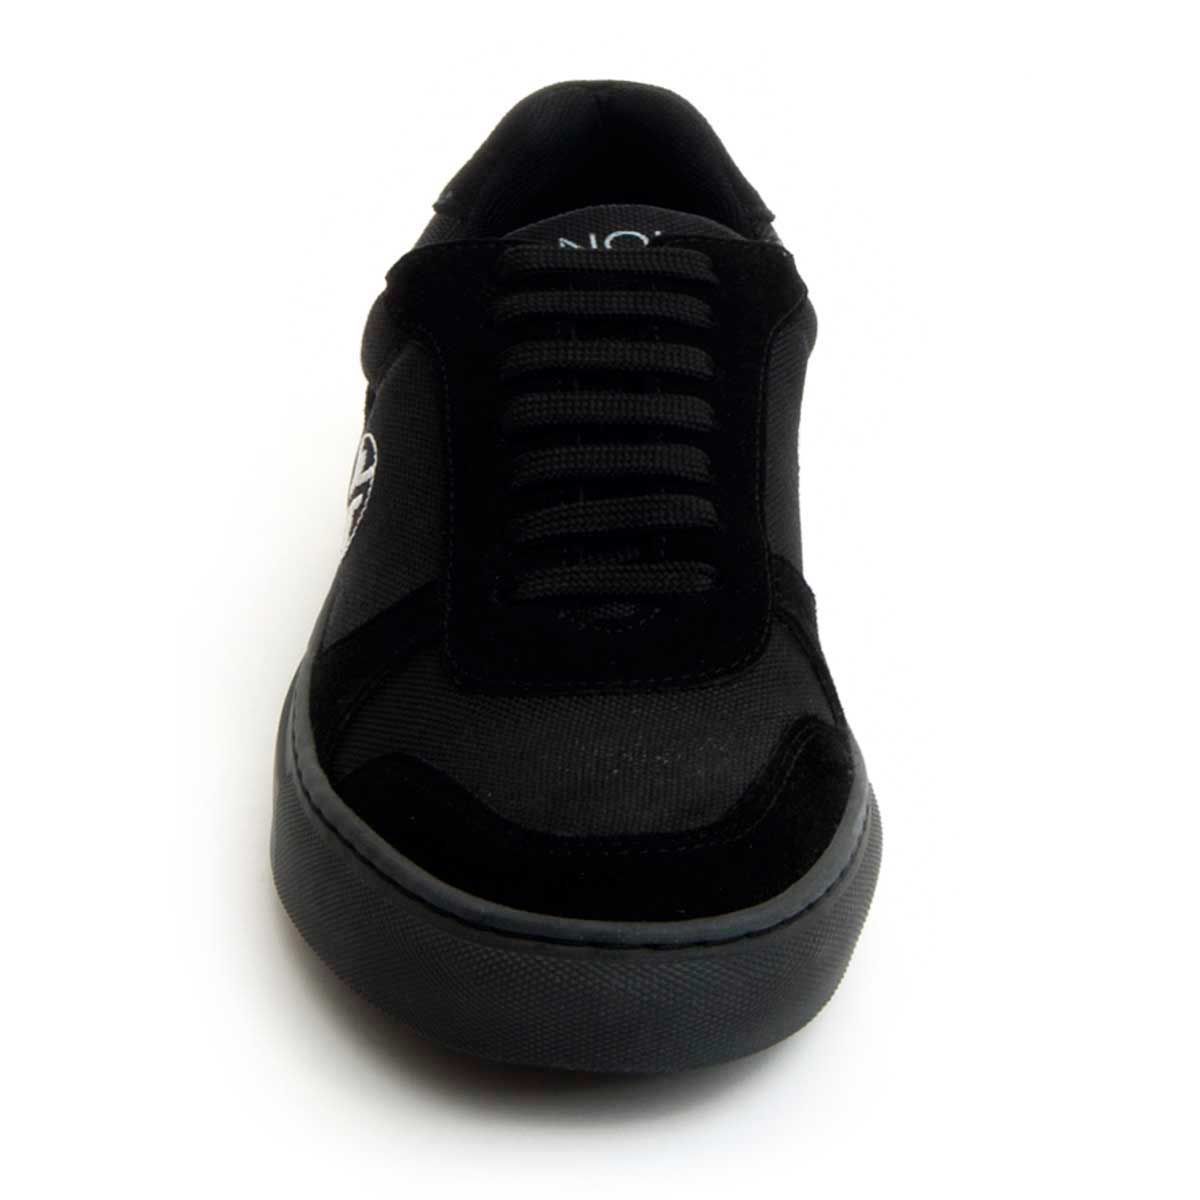 Collection capsule by pronoia. Perfect Sneaker for a fur man. Fine thread, no buttonhole. It brings anterior and back buttock and comes doubly sewn, giving it greater quality and resistance to the shoe. Hormo comfort and easy-to-clean material. Interior and leather plant without chrome 6. Quilted template. Flexible floor and rubber sole with grip, to avoid slides. Surely you will be successful with this model, if you want to give a sport and special touch to your look. 100% skin of the best quality. Made in Spain.